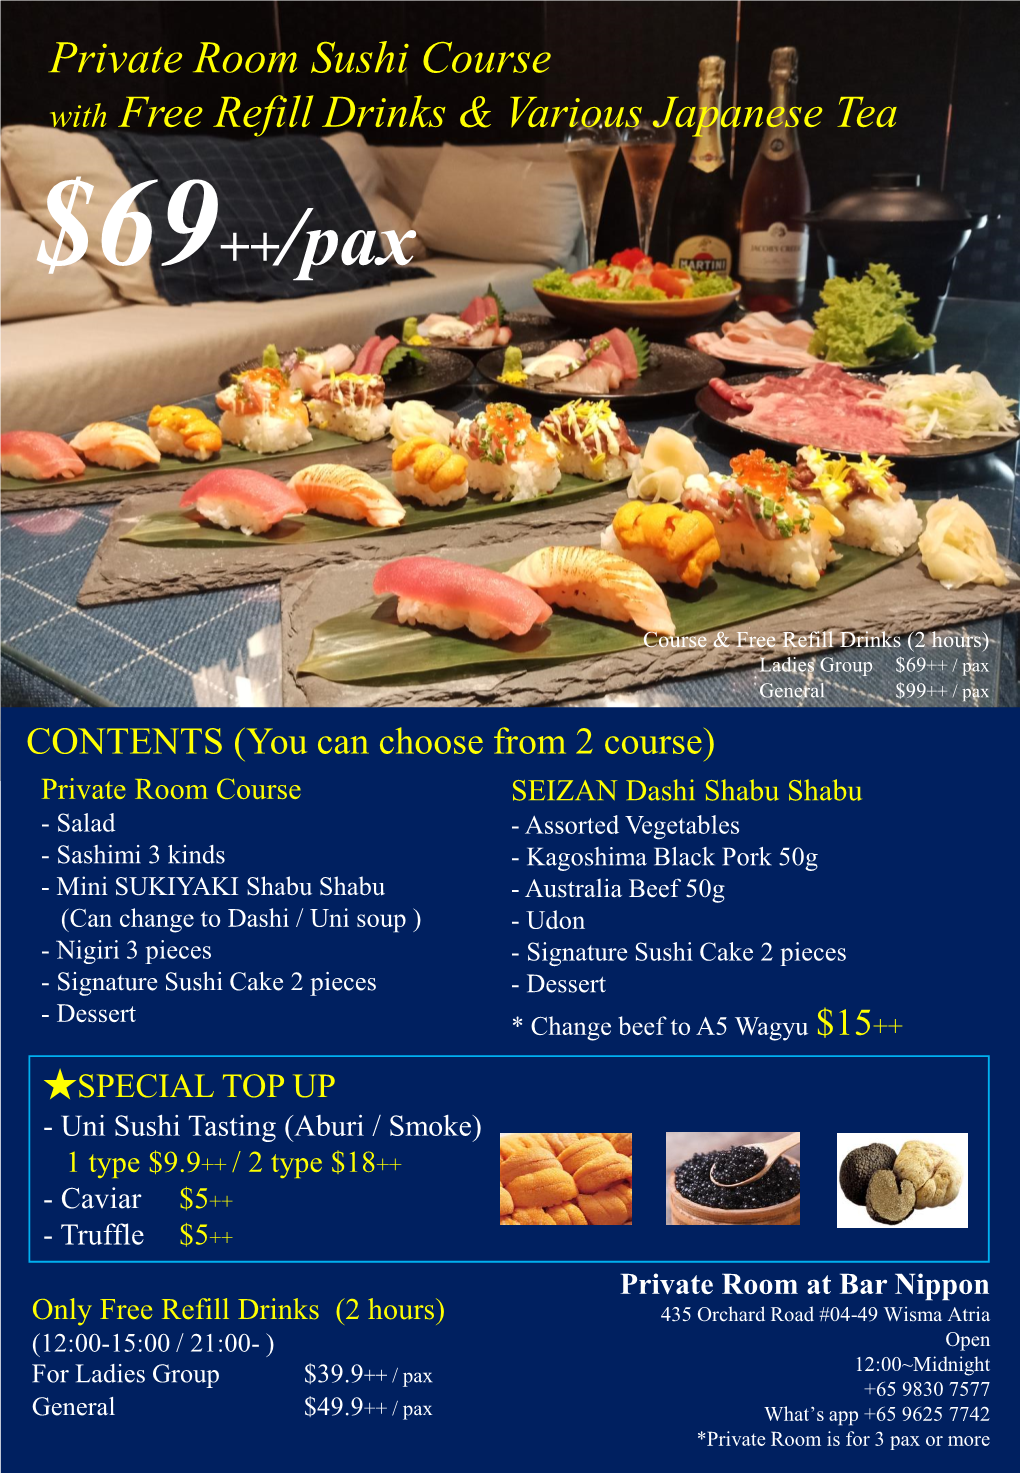 Private Room Sushi Course with Free Refill Drinks & Various